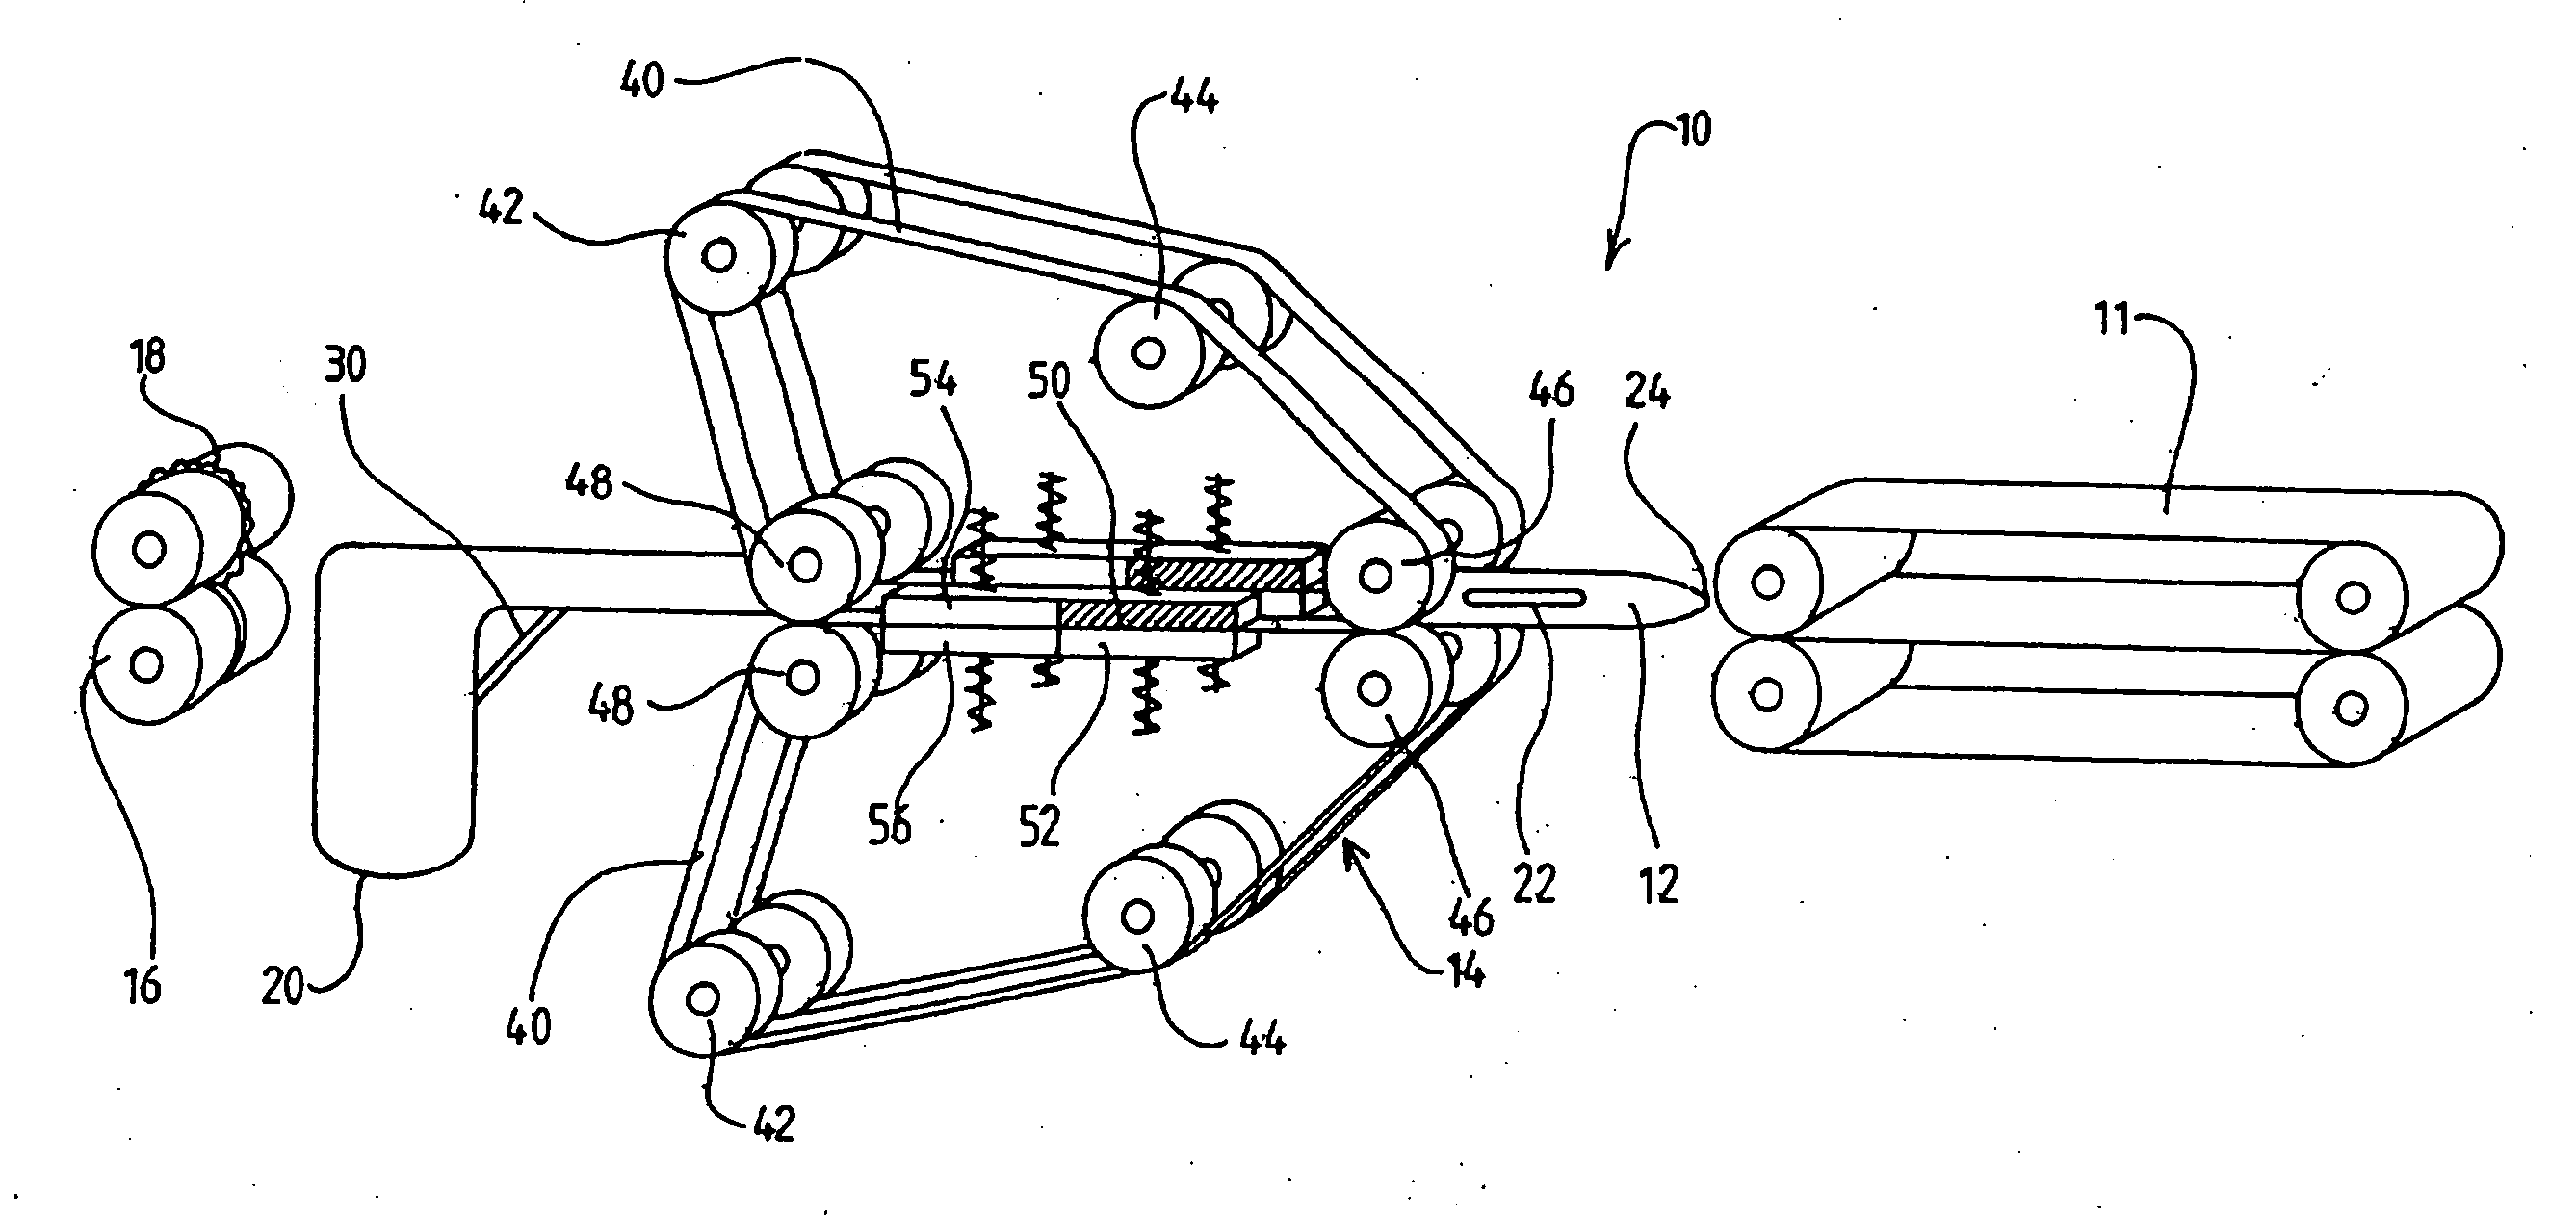 Machine and methods for the manufacture of air-filled cushions